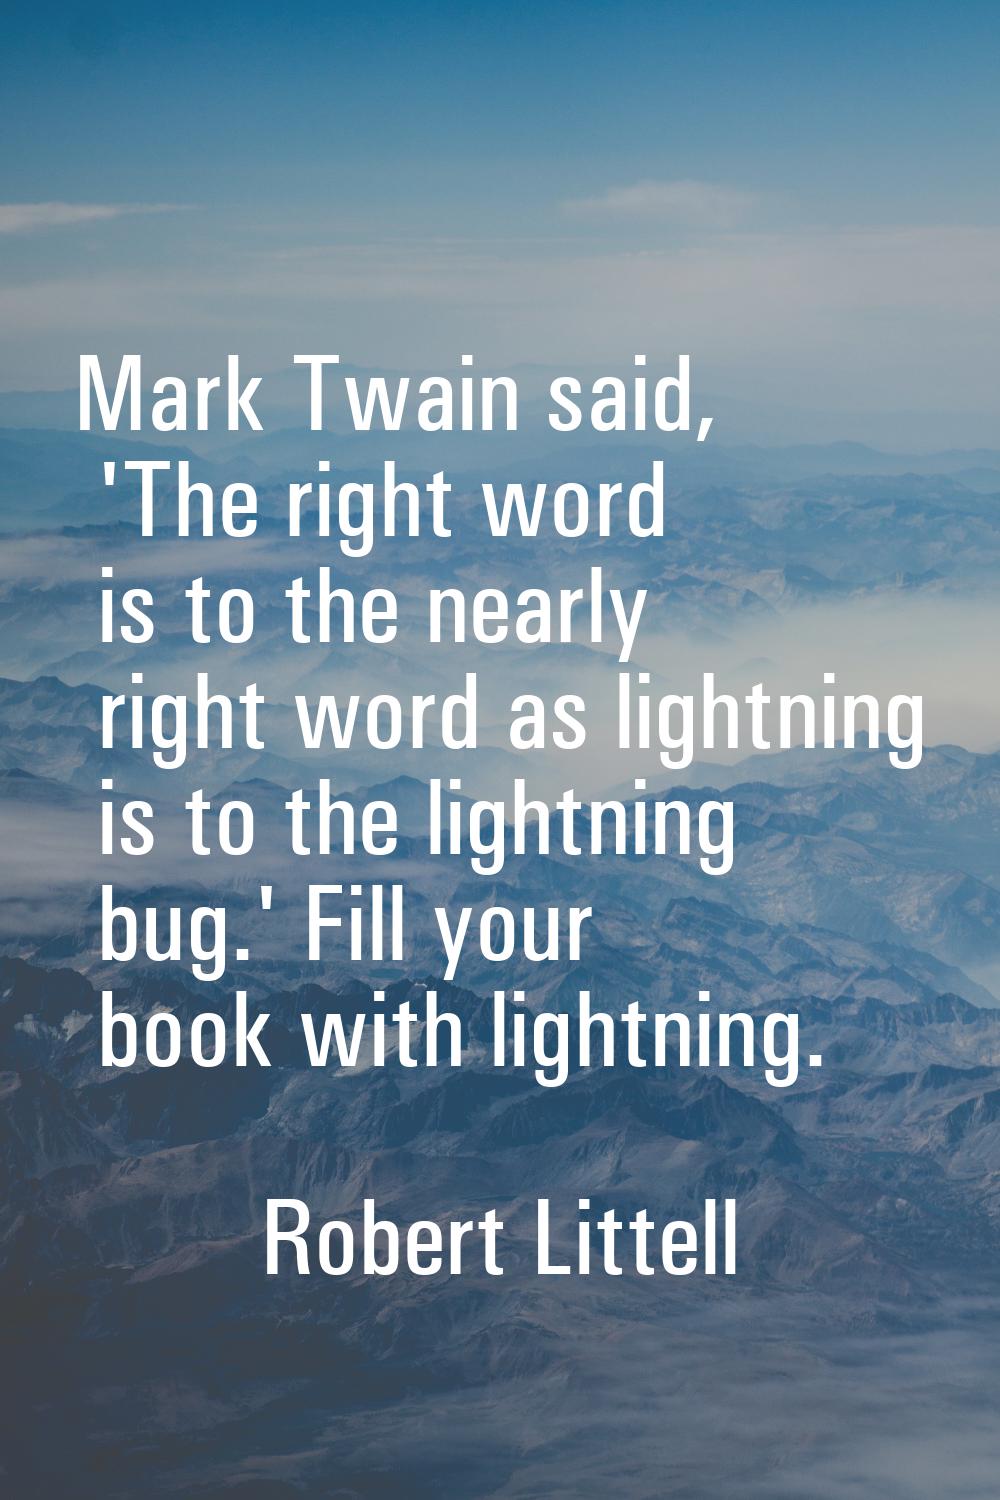 Mark Twain said, 'The right word is to the nearly right word as lightning is to the lightning bug.'